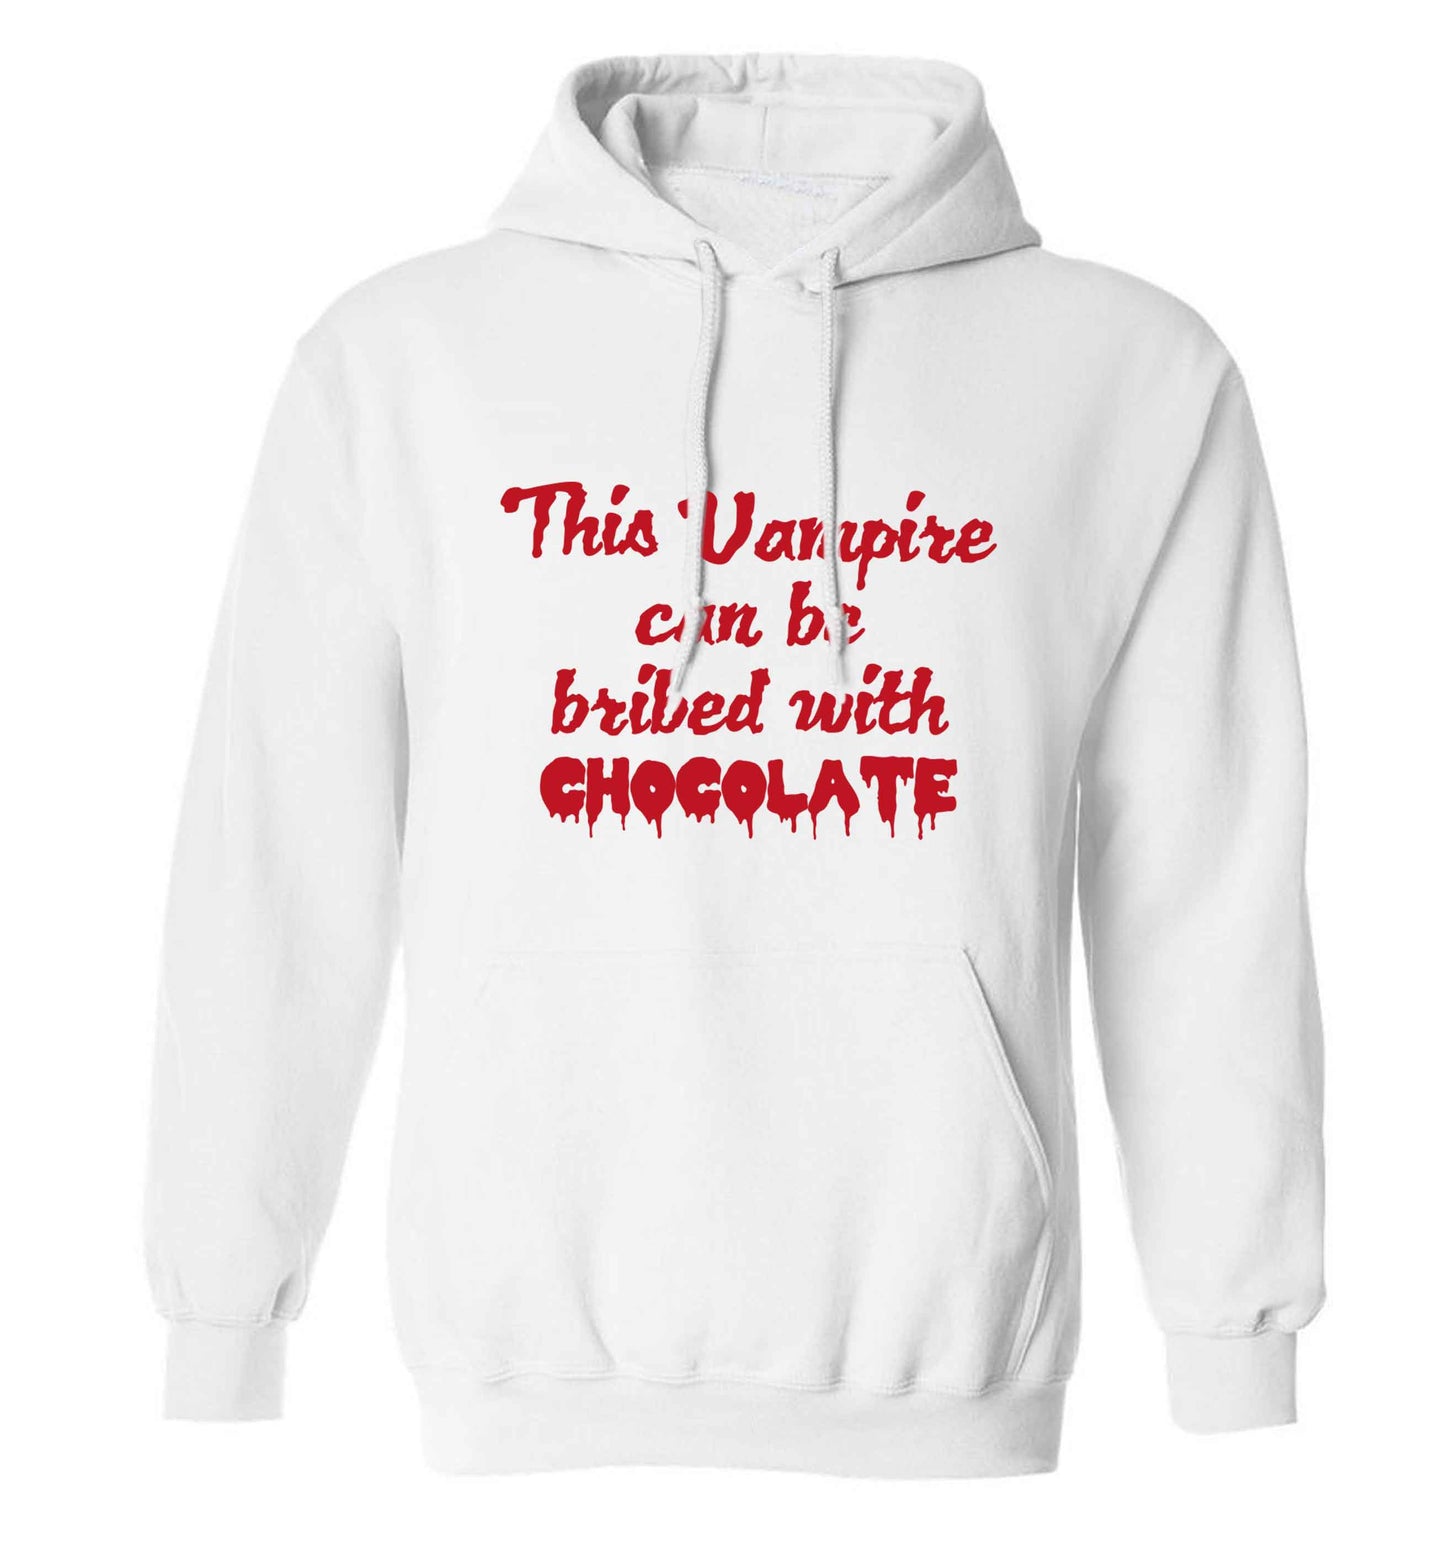 This vampire can be bribed with chocolate adults unisex white hoodie 2XL